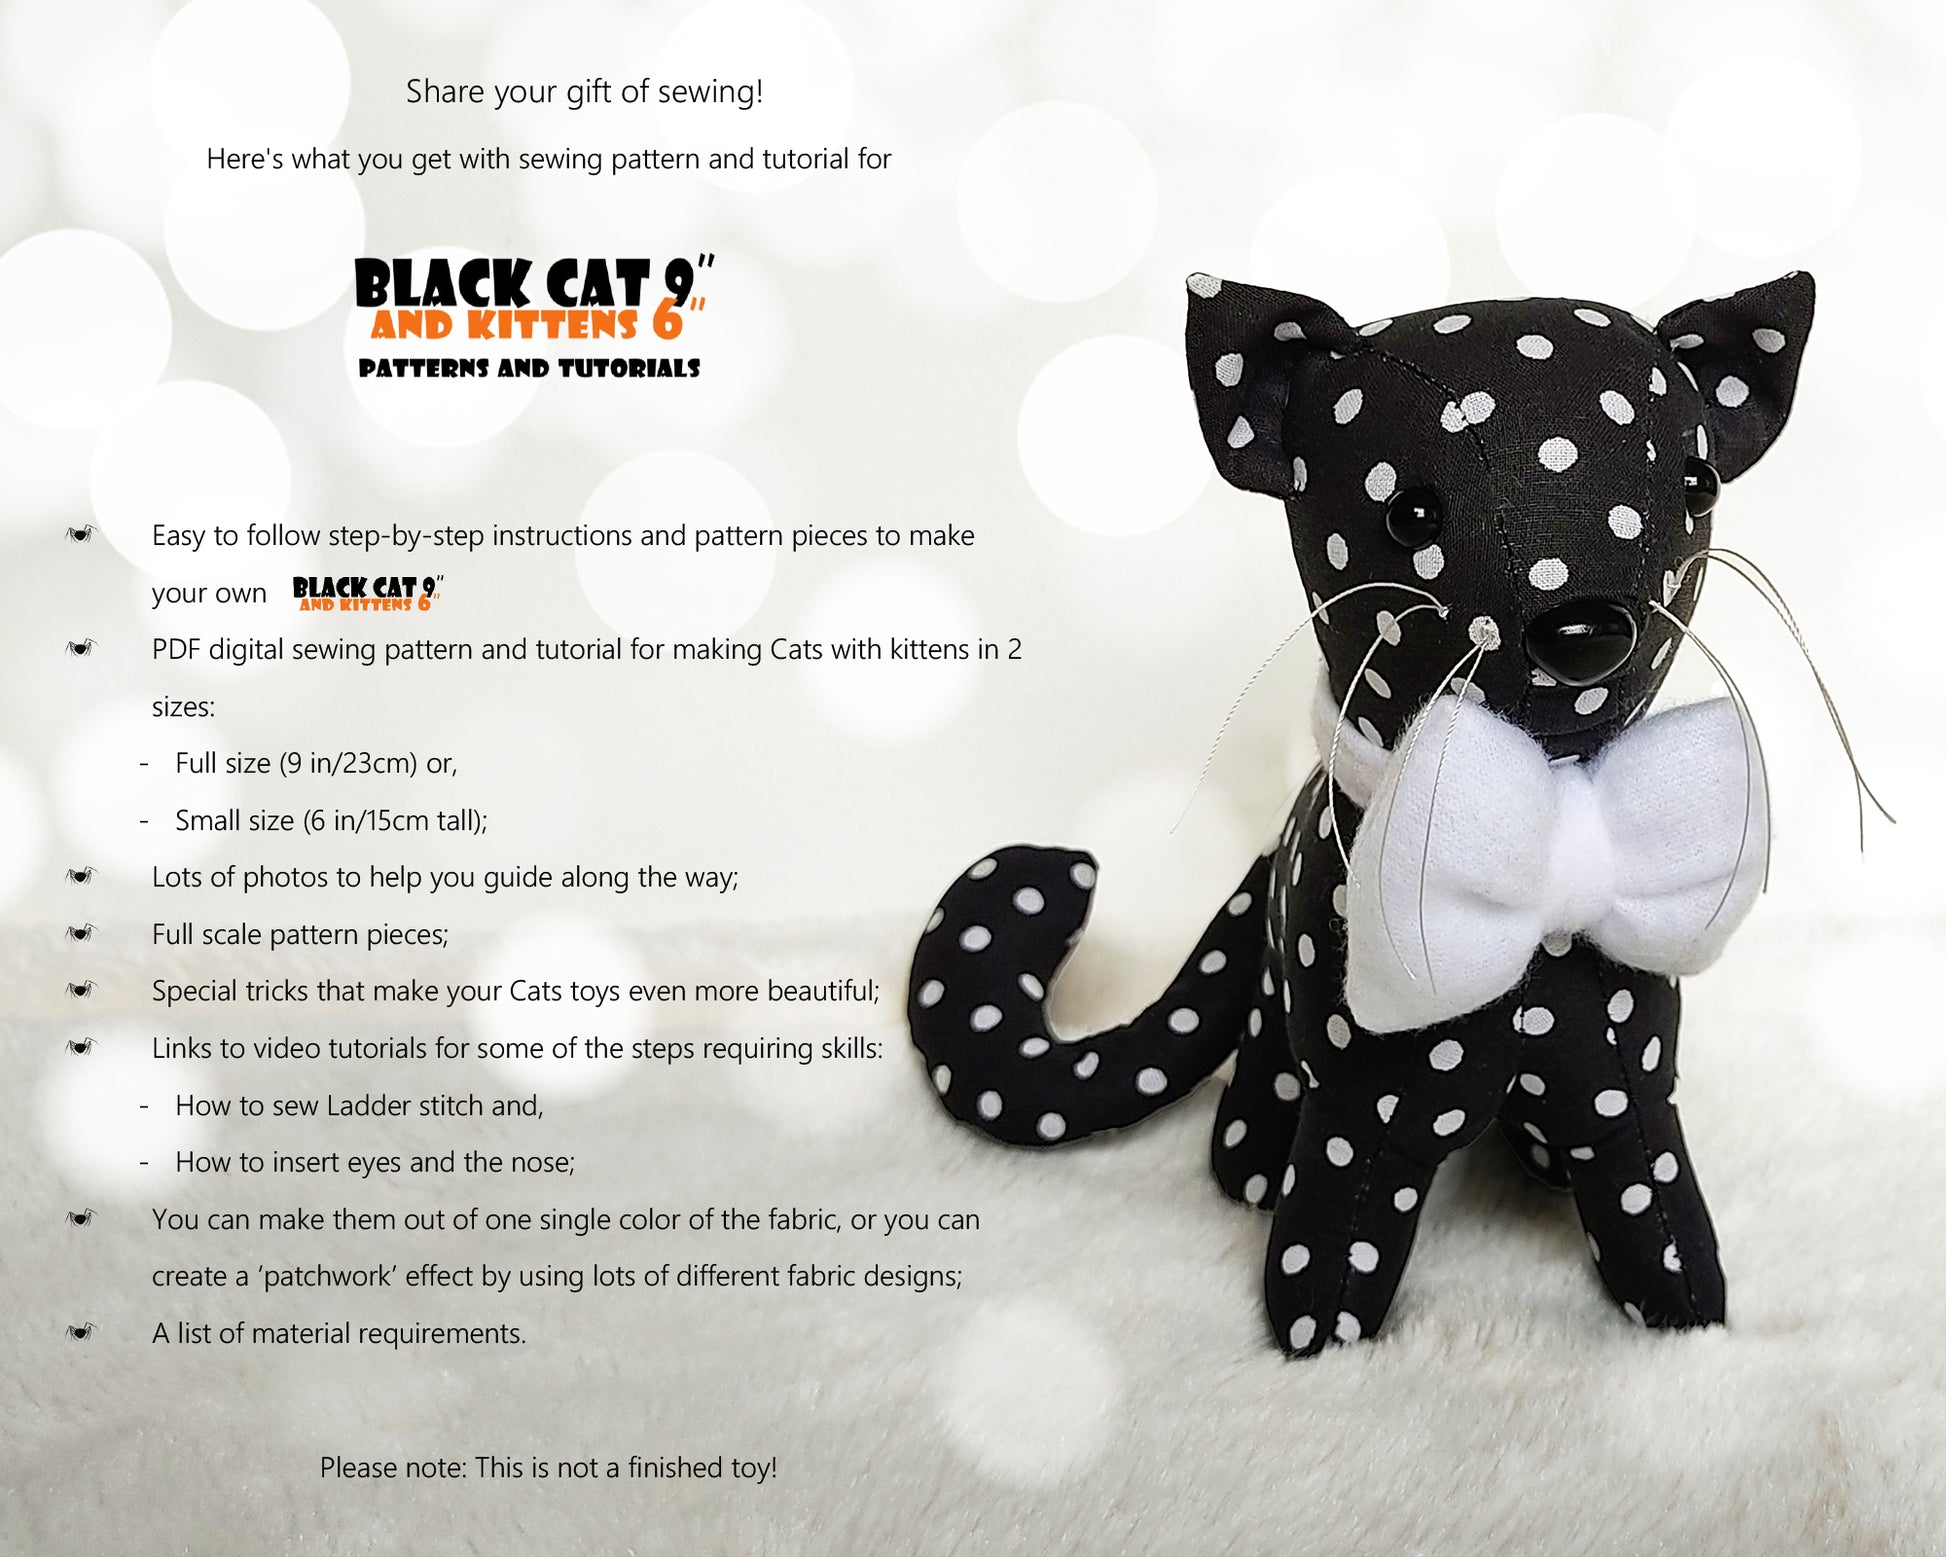 Black Cat and Kittens  - PDF sewing pattern and tutorial 09